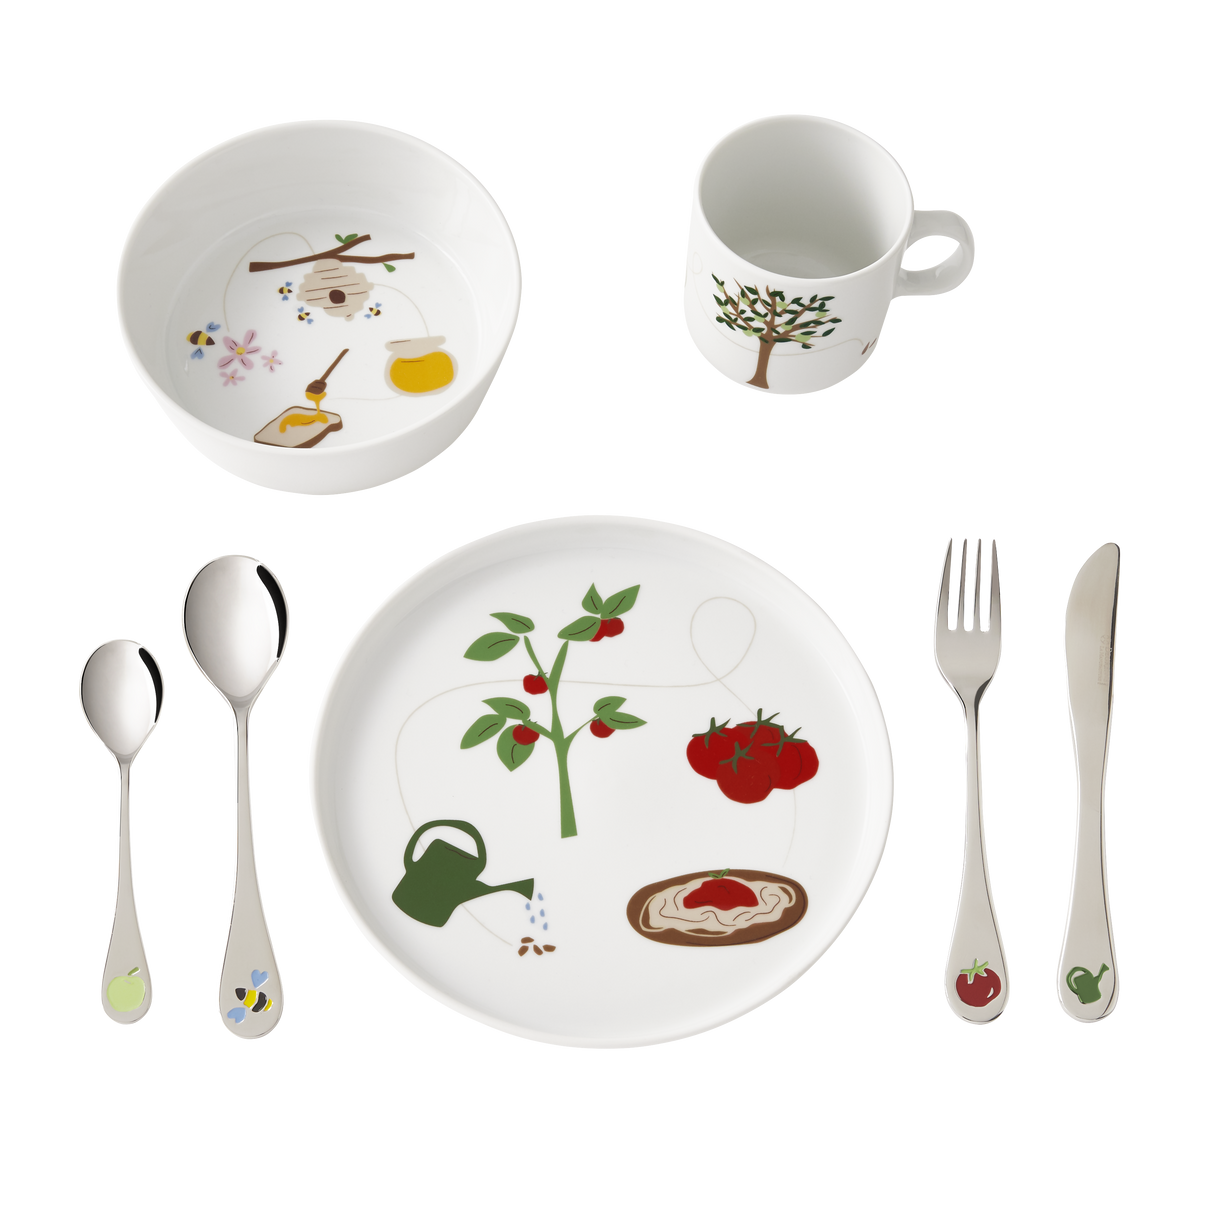 EVEIL GOURMAND 7 pieces tableware and cutlery children gift box